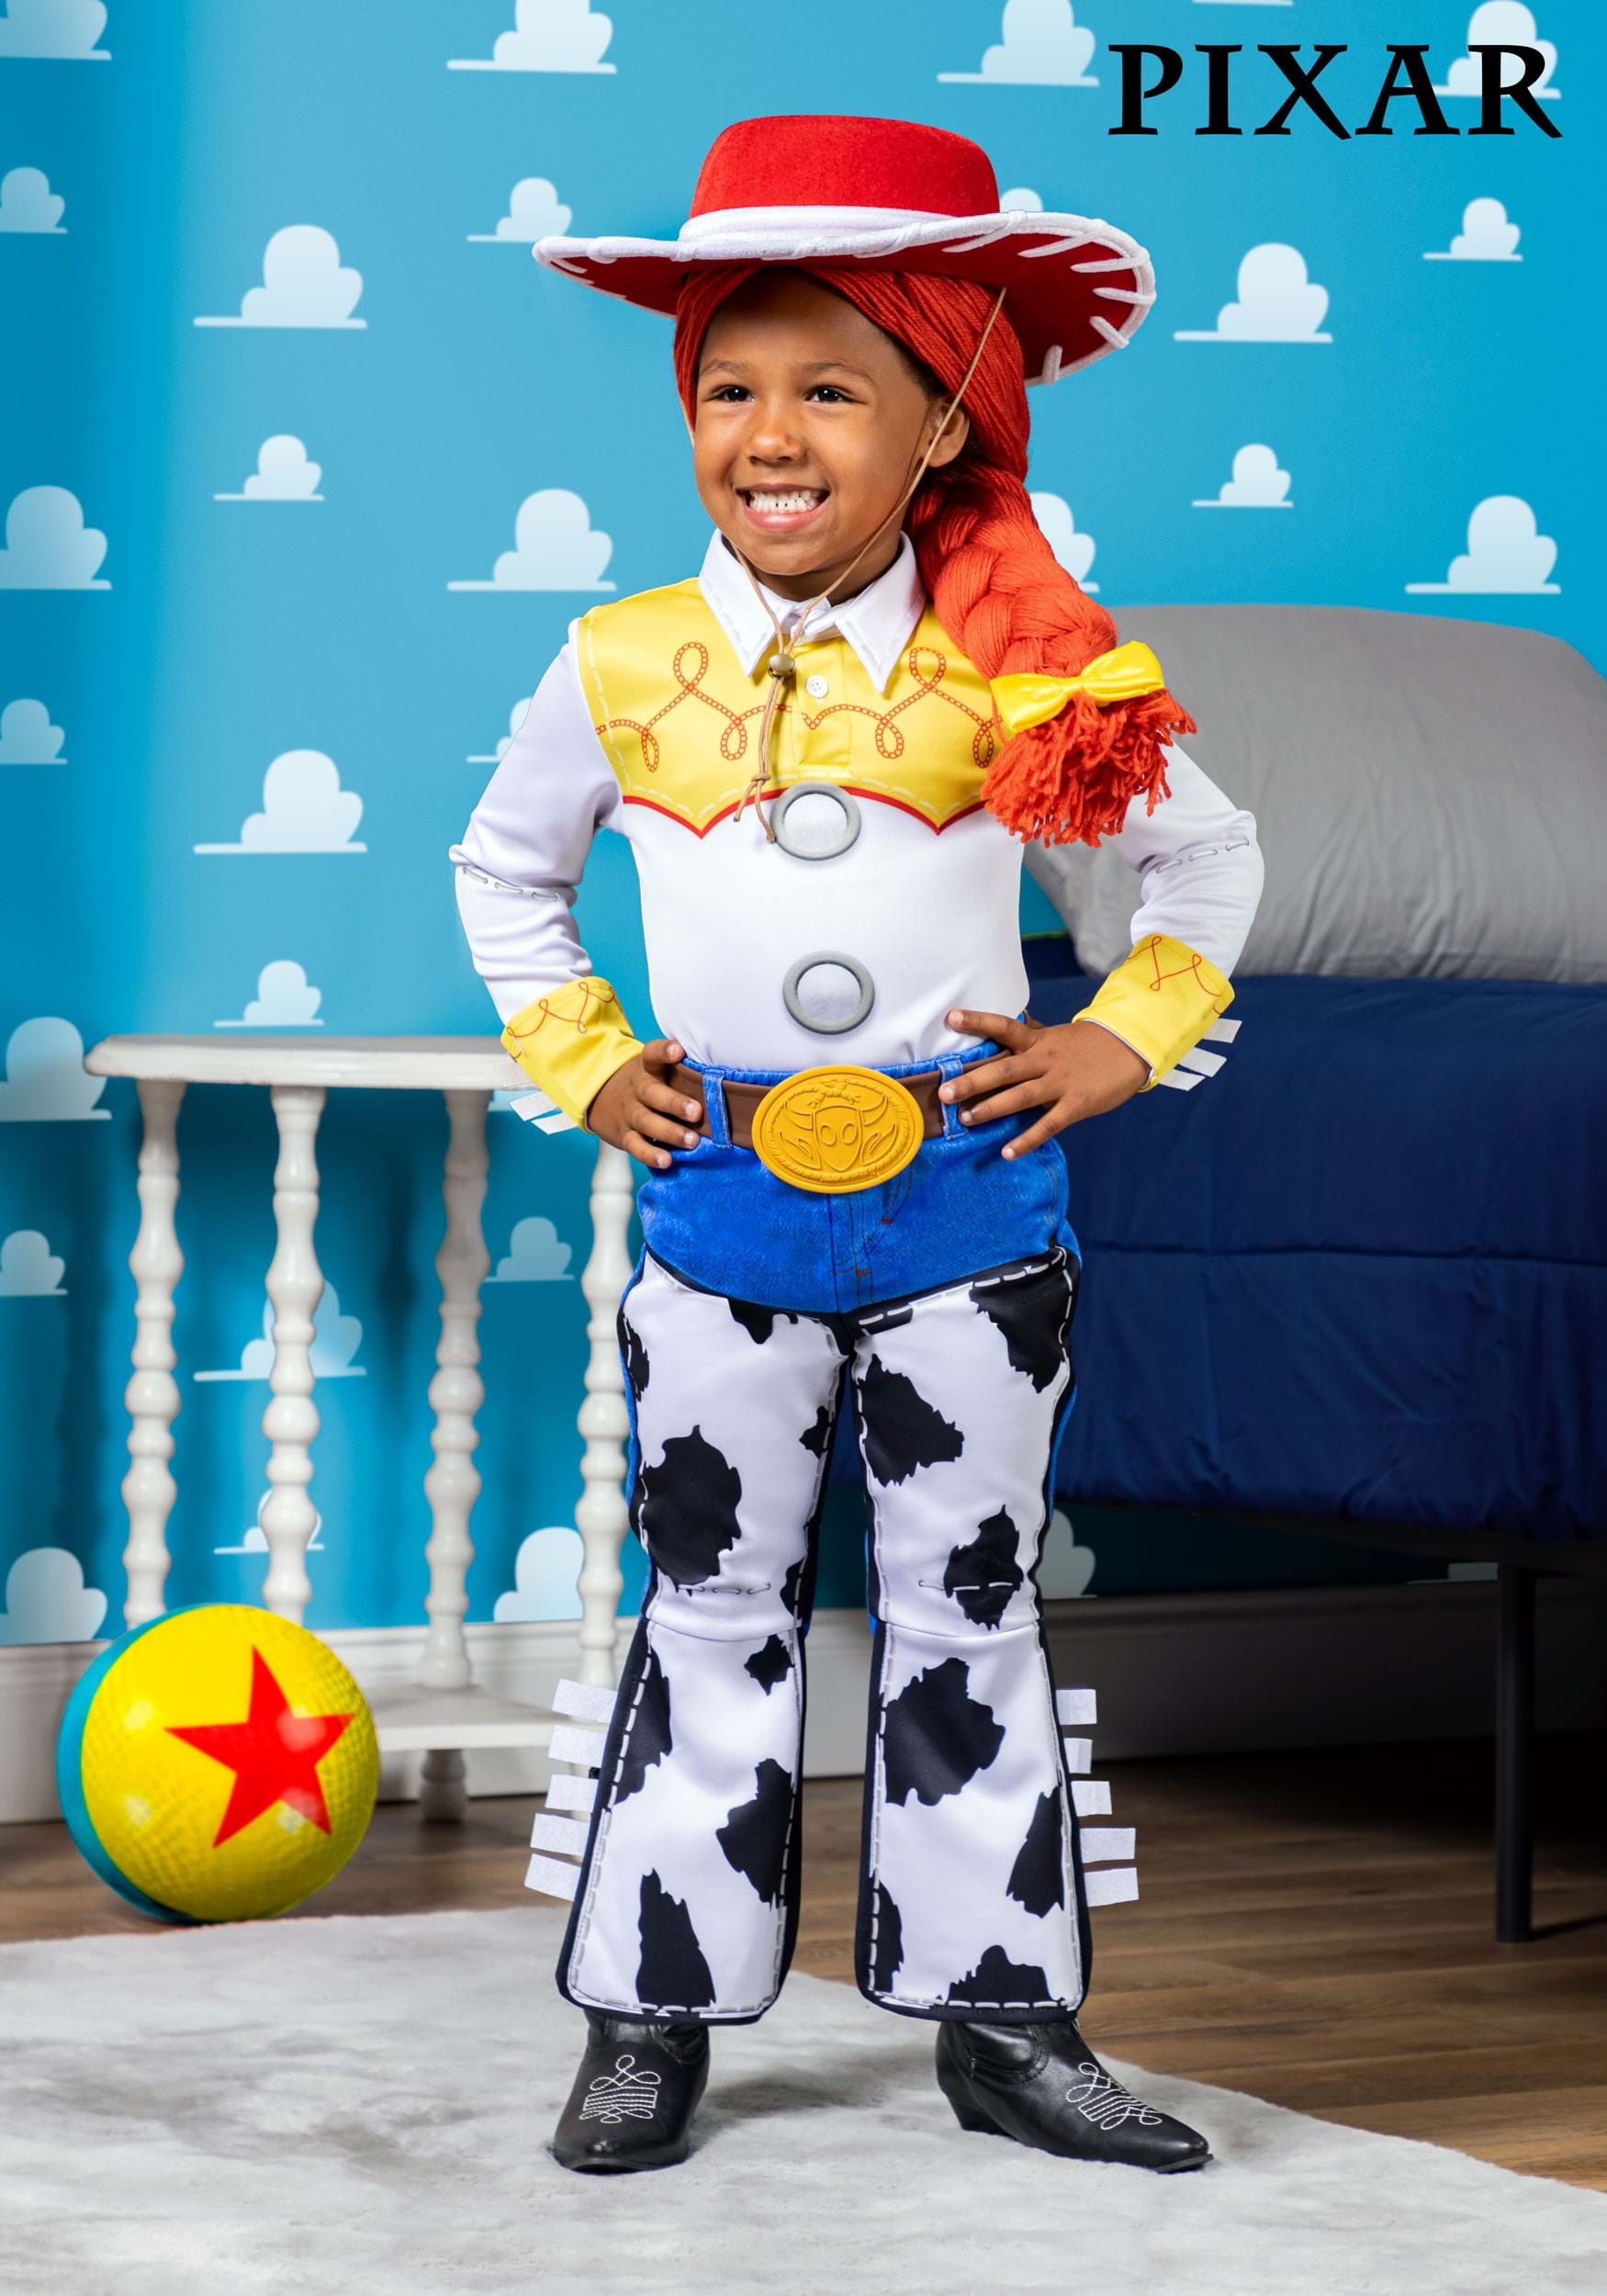 https://images.fun.com/products/76008/1-1/-toddler-deluxe-jessie-toy-story-costume.jpg